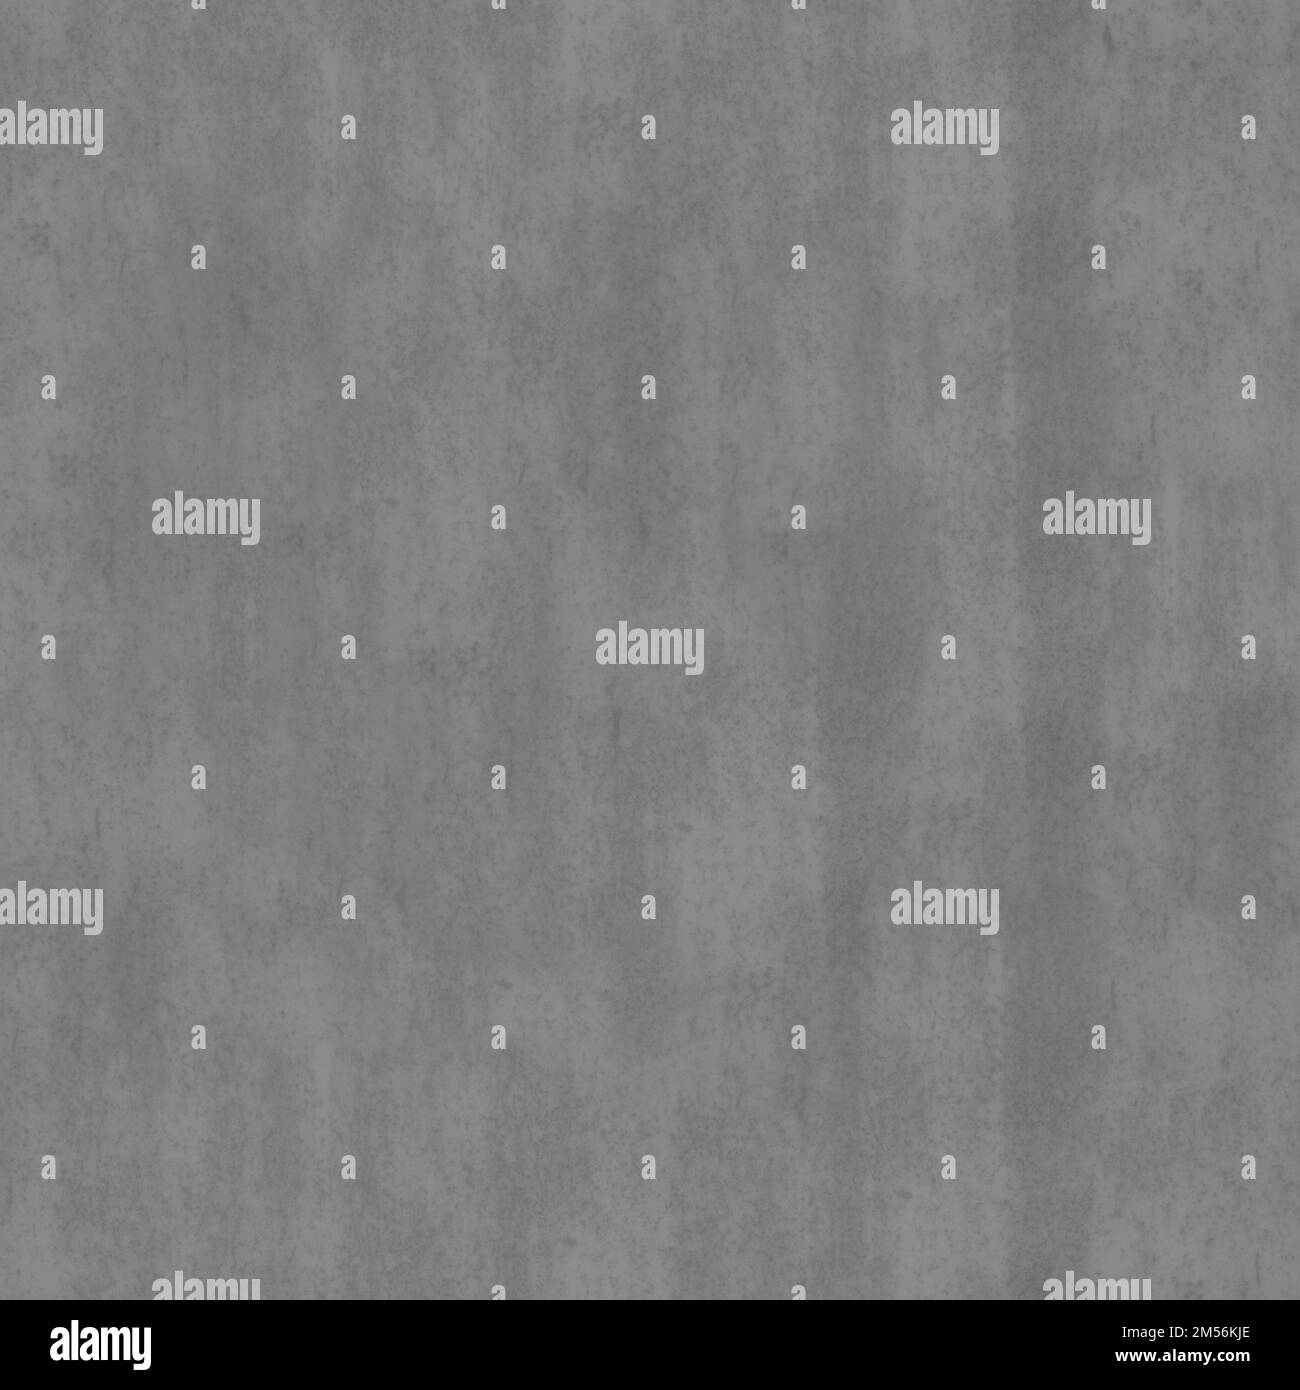 Bump map texture metal panels, height texture mapping Stock Photo